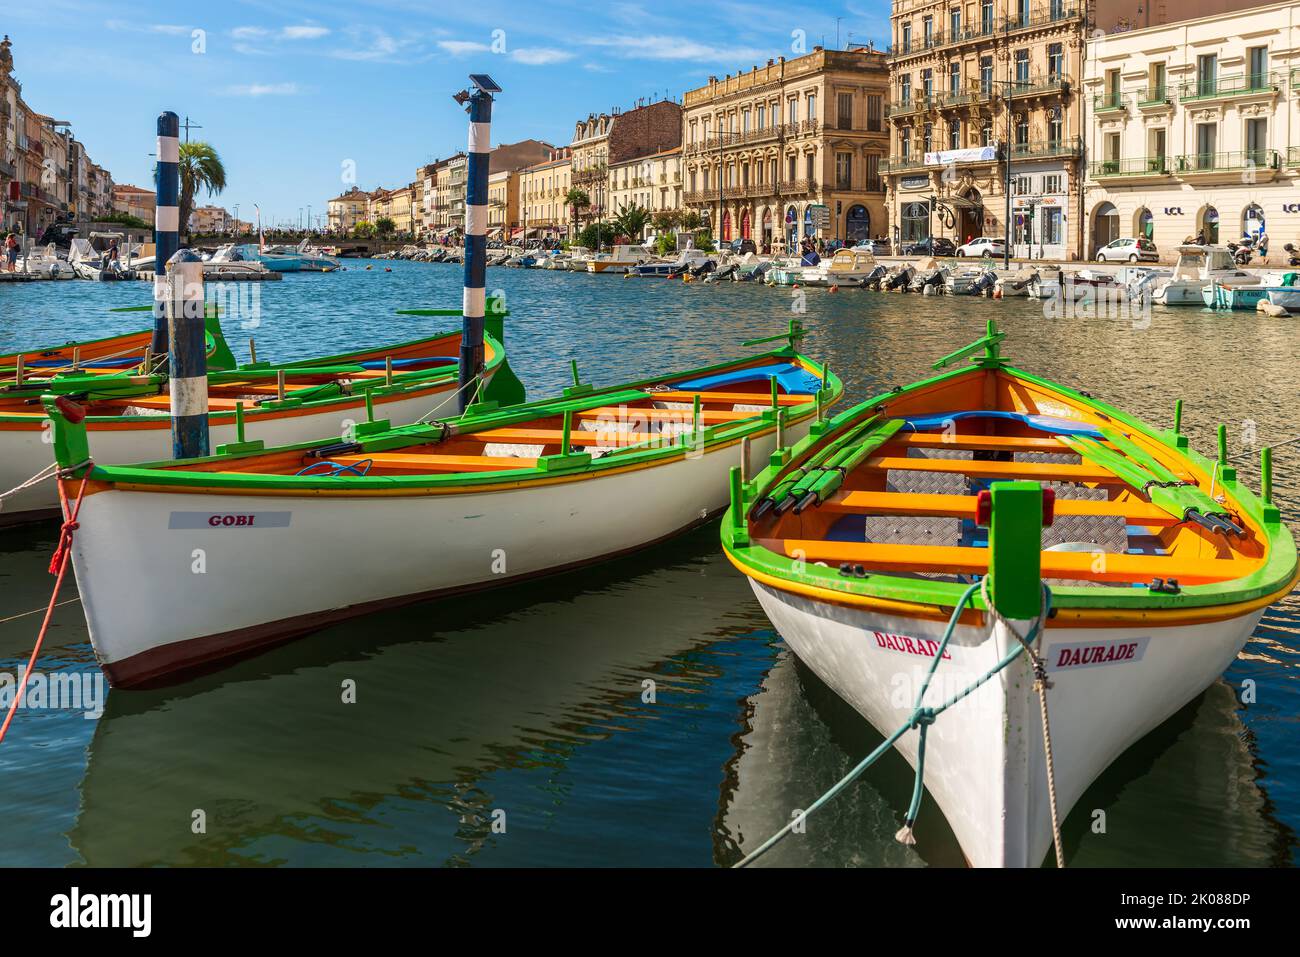 Typical Sète boats on the royal canal in Sète, Hérault, Occitanie, France Stock Photo